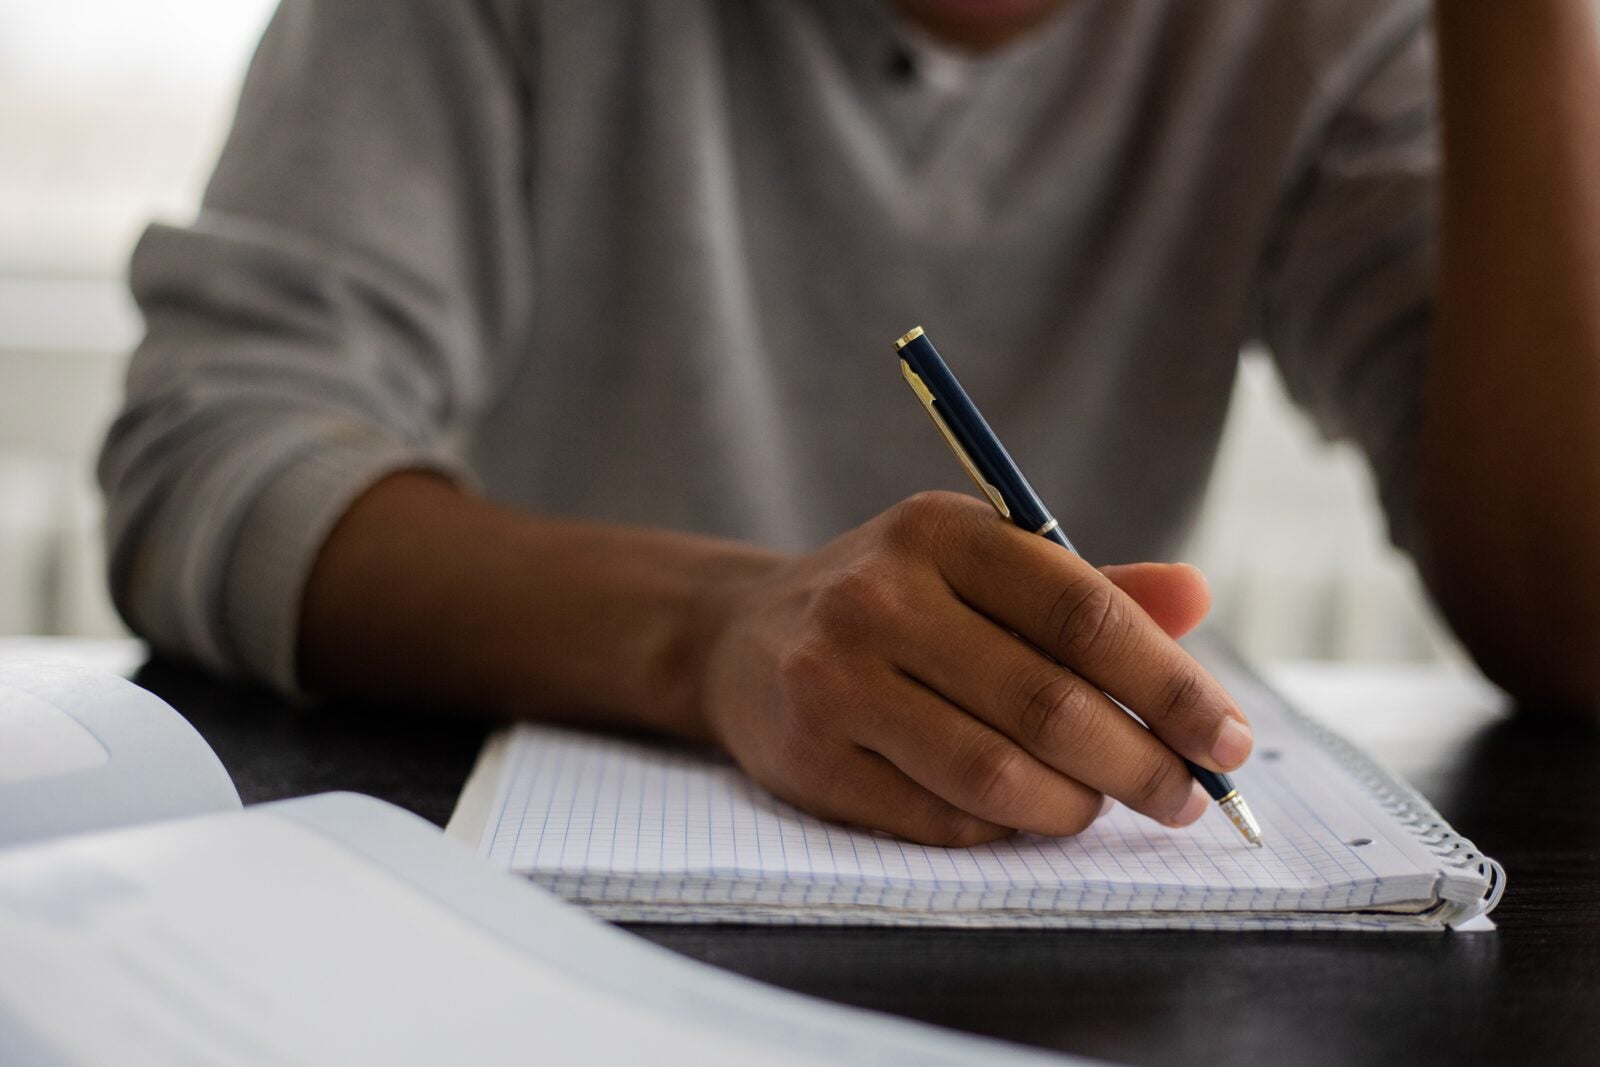 A dark skinned man holding a pen and writing on a notebook.